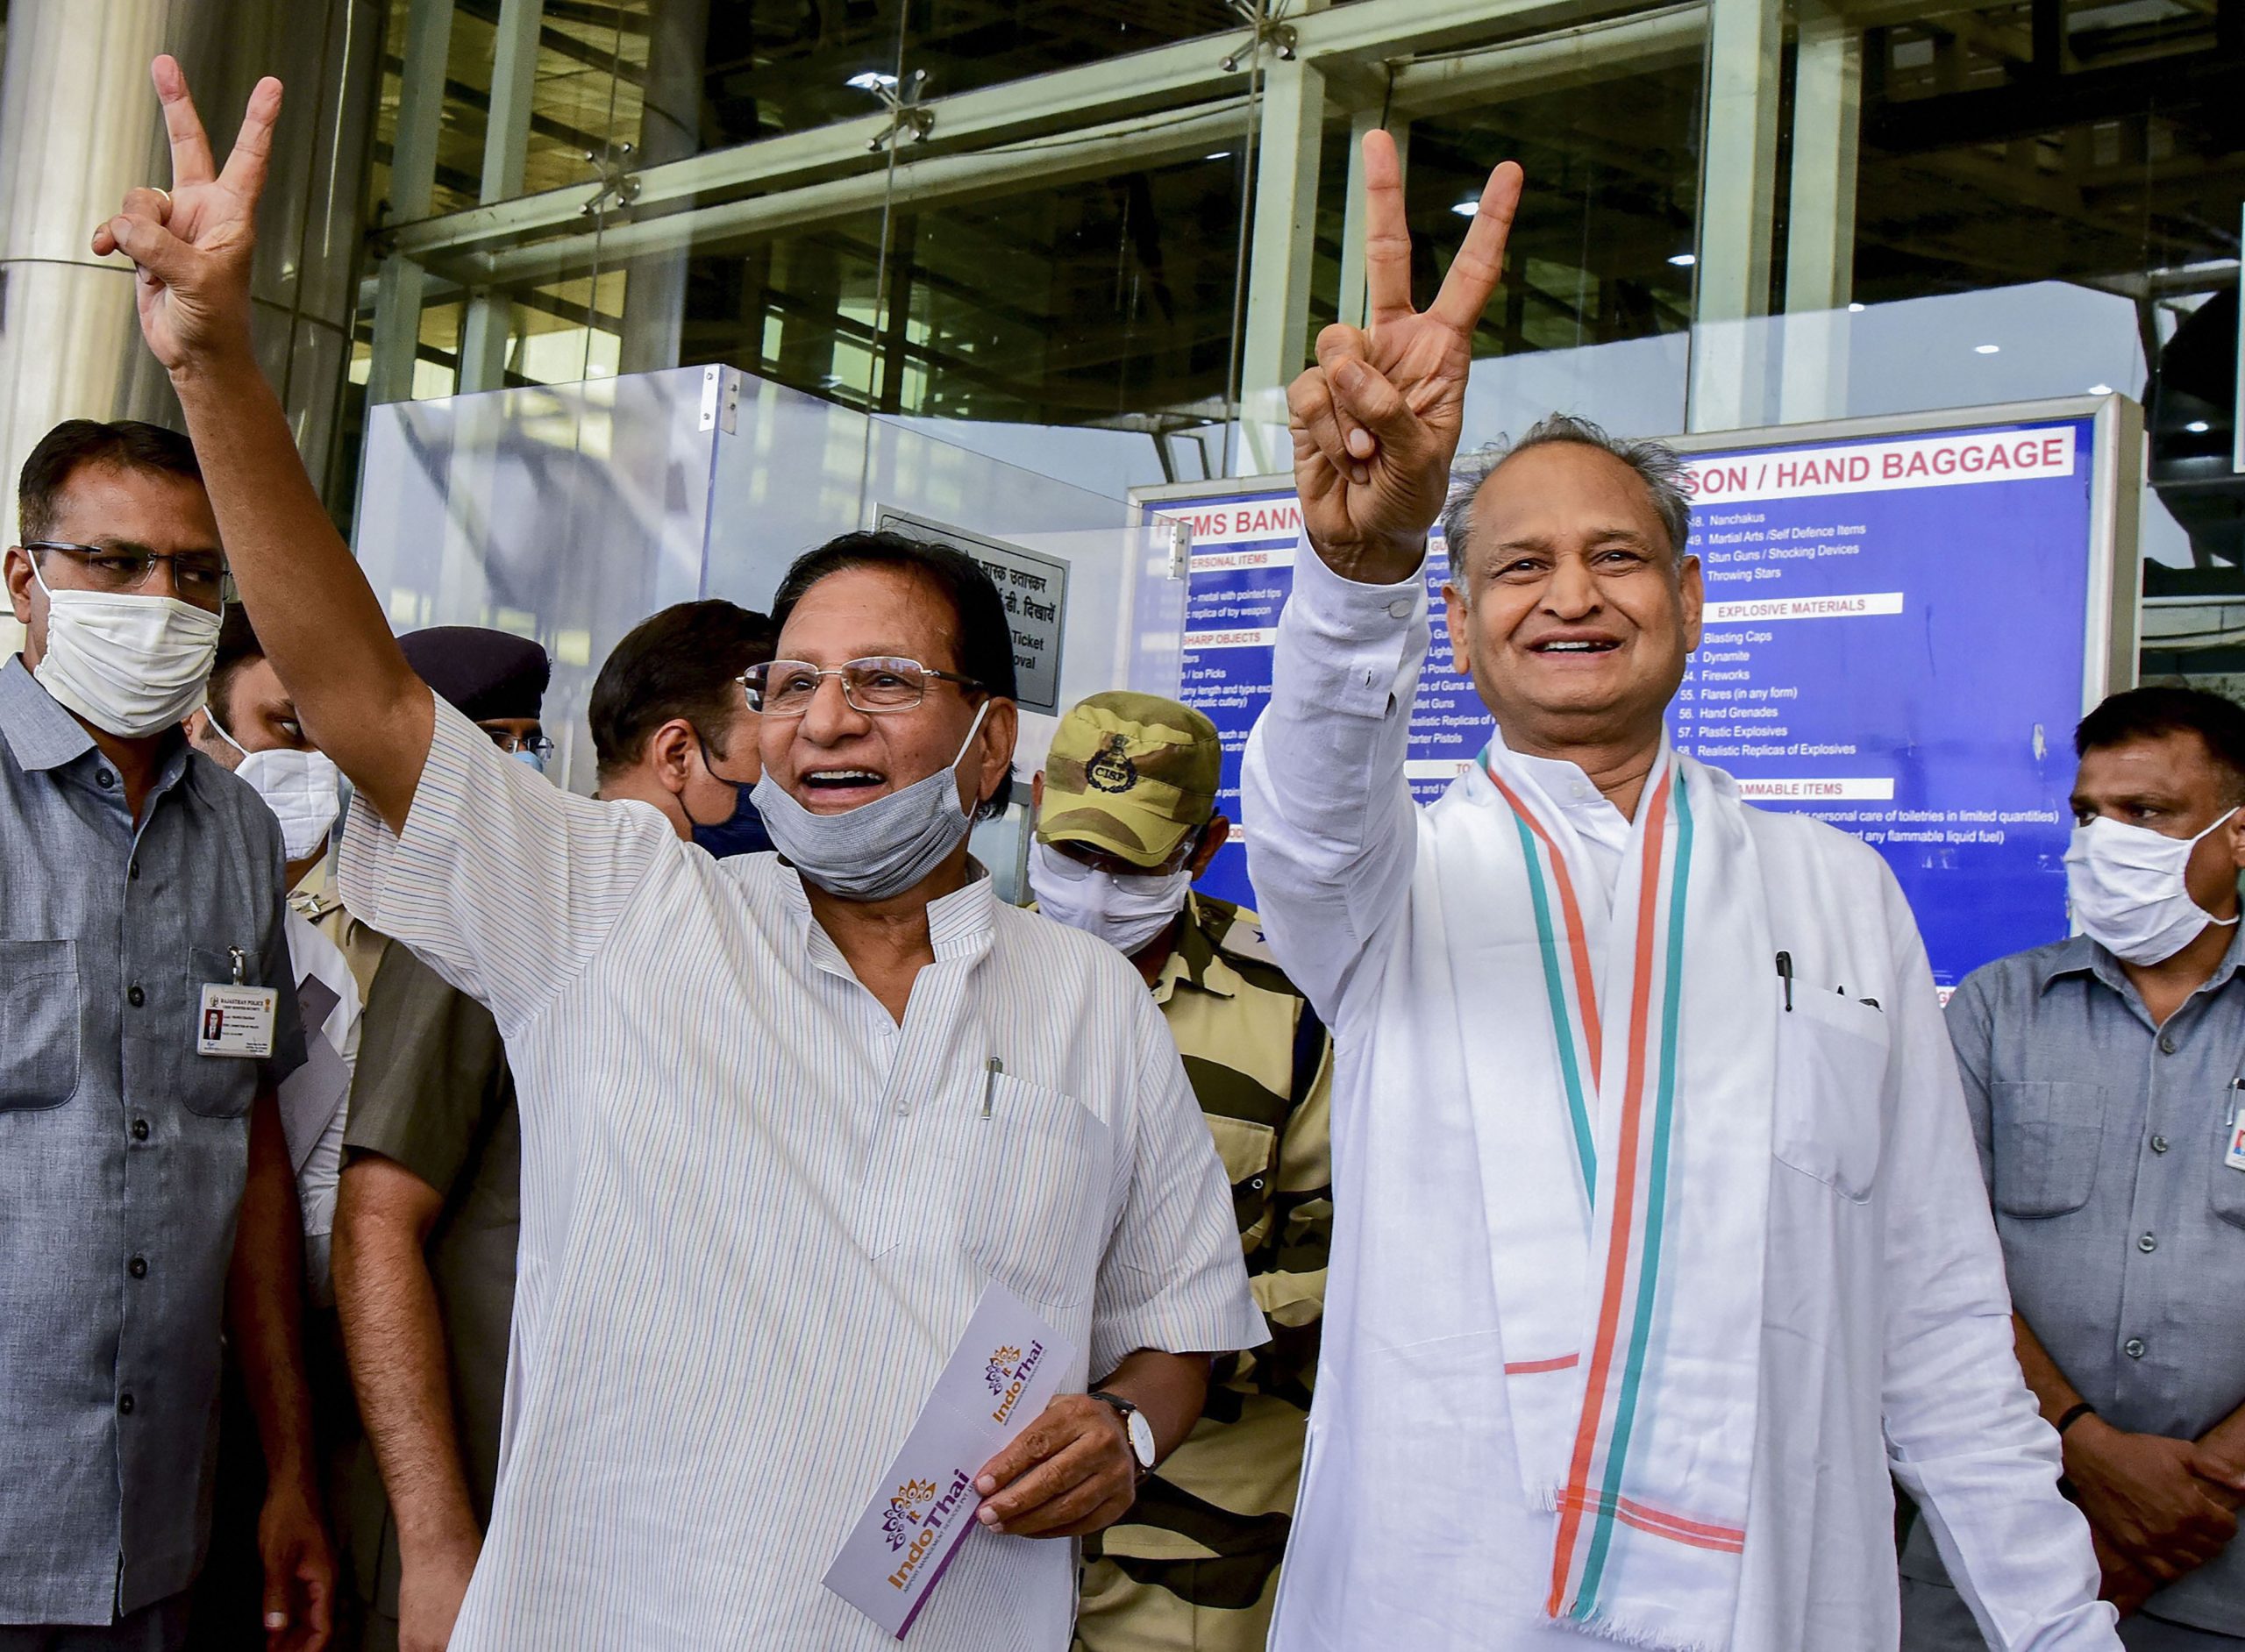 Ashok Gehlot urges Rajasthan MLAs to show unity on the floor of the house